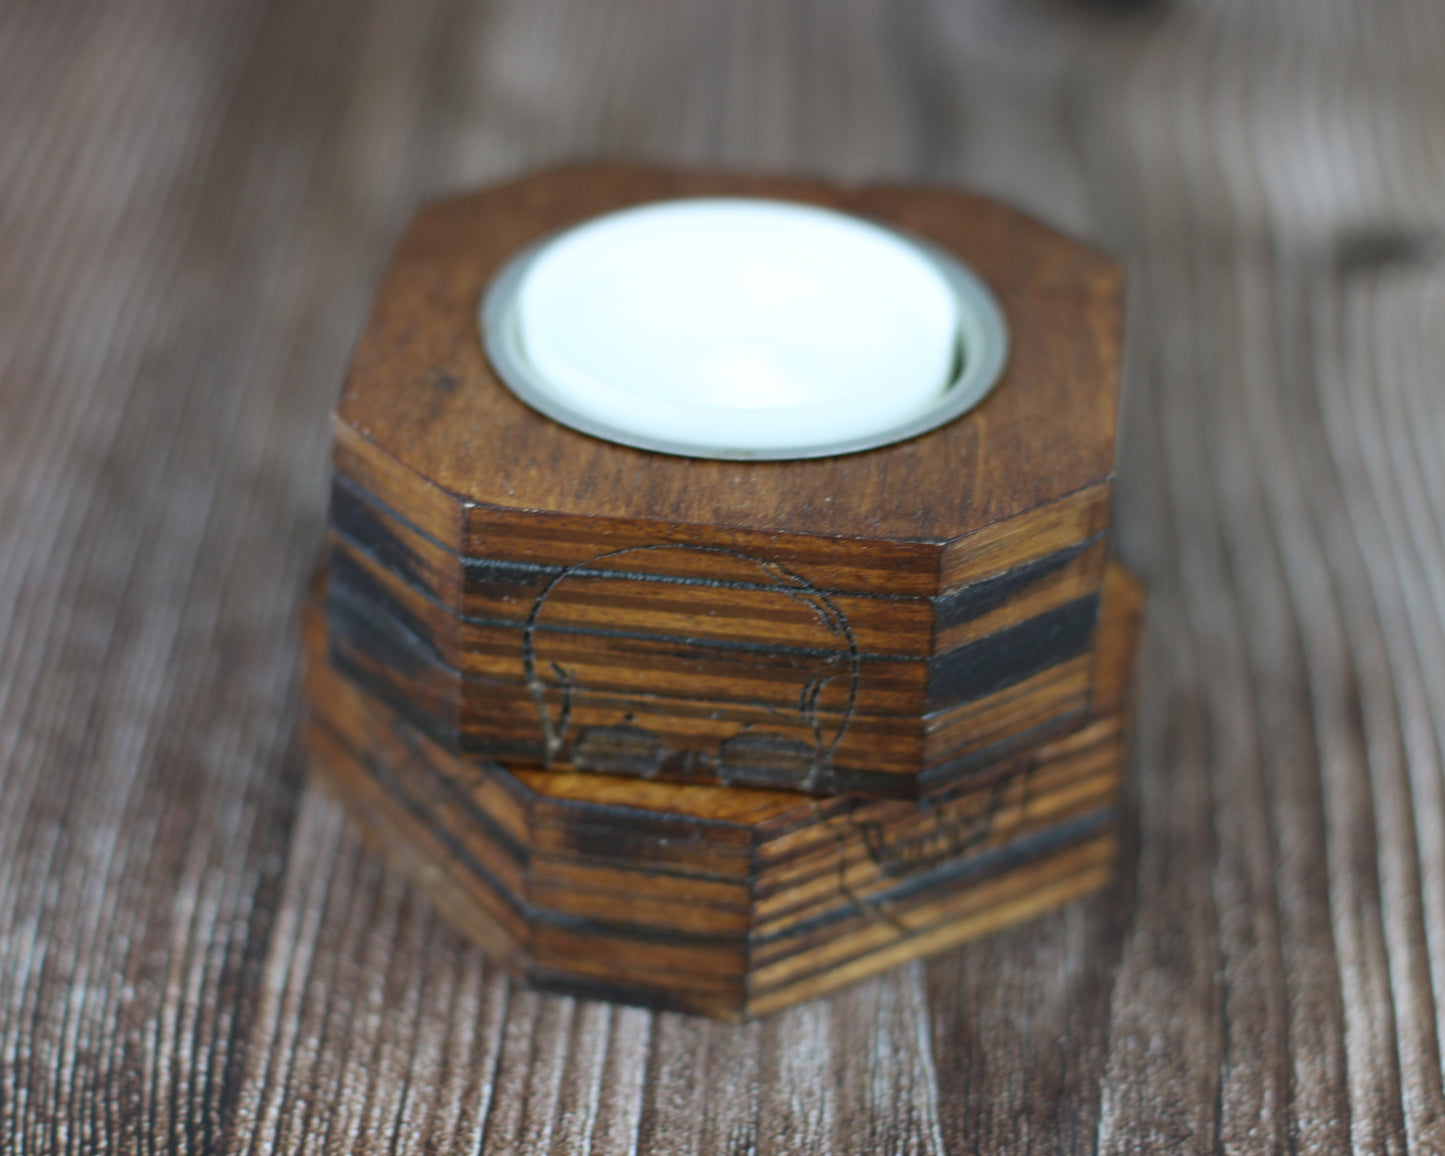 Secret compartment wooden candle holder with engraved skull, stash your valuables safely in the hidden tin